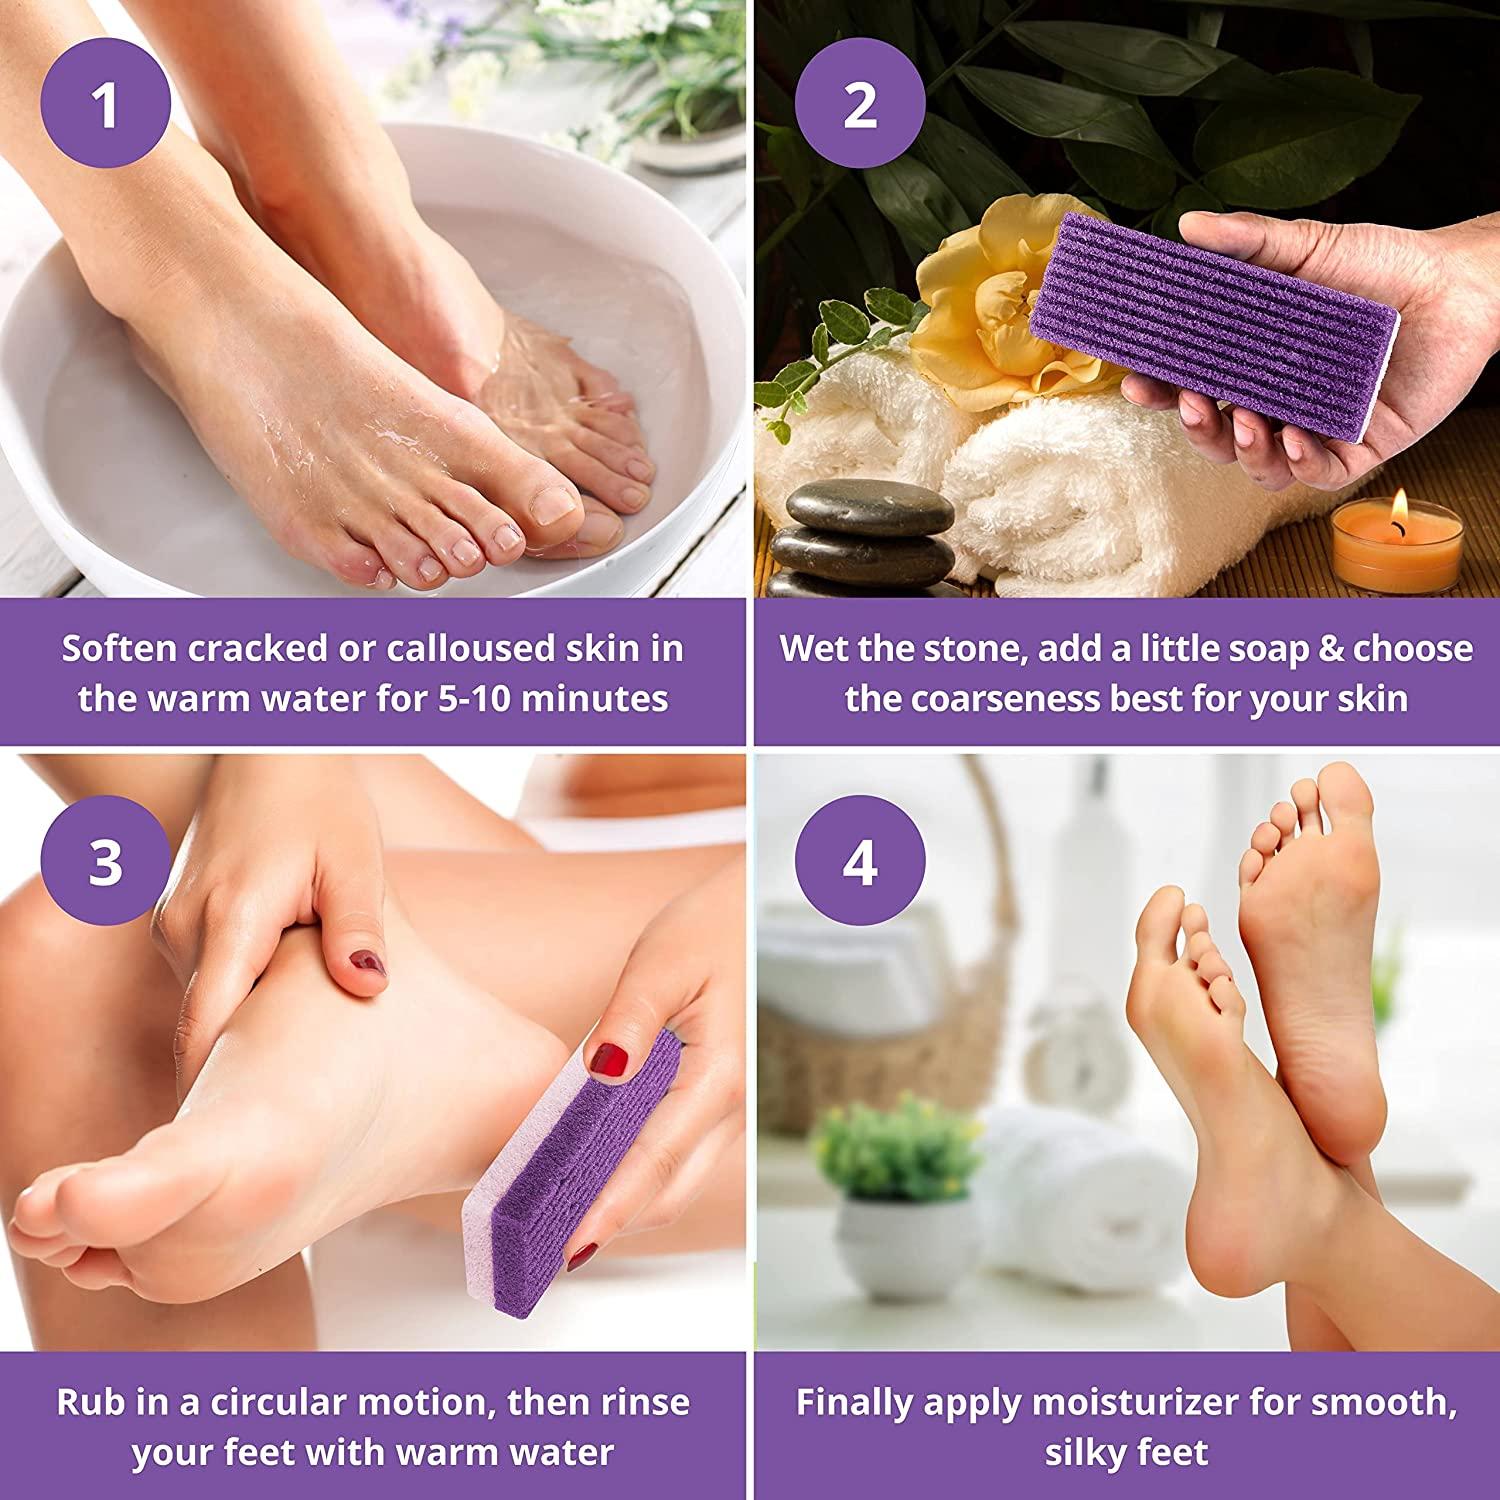 Beauty & Hygiene for Girls : How to Use a Pumice Stone on Your Feet 